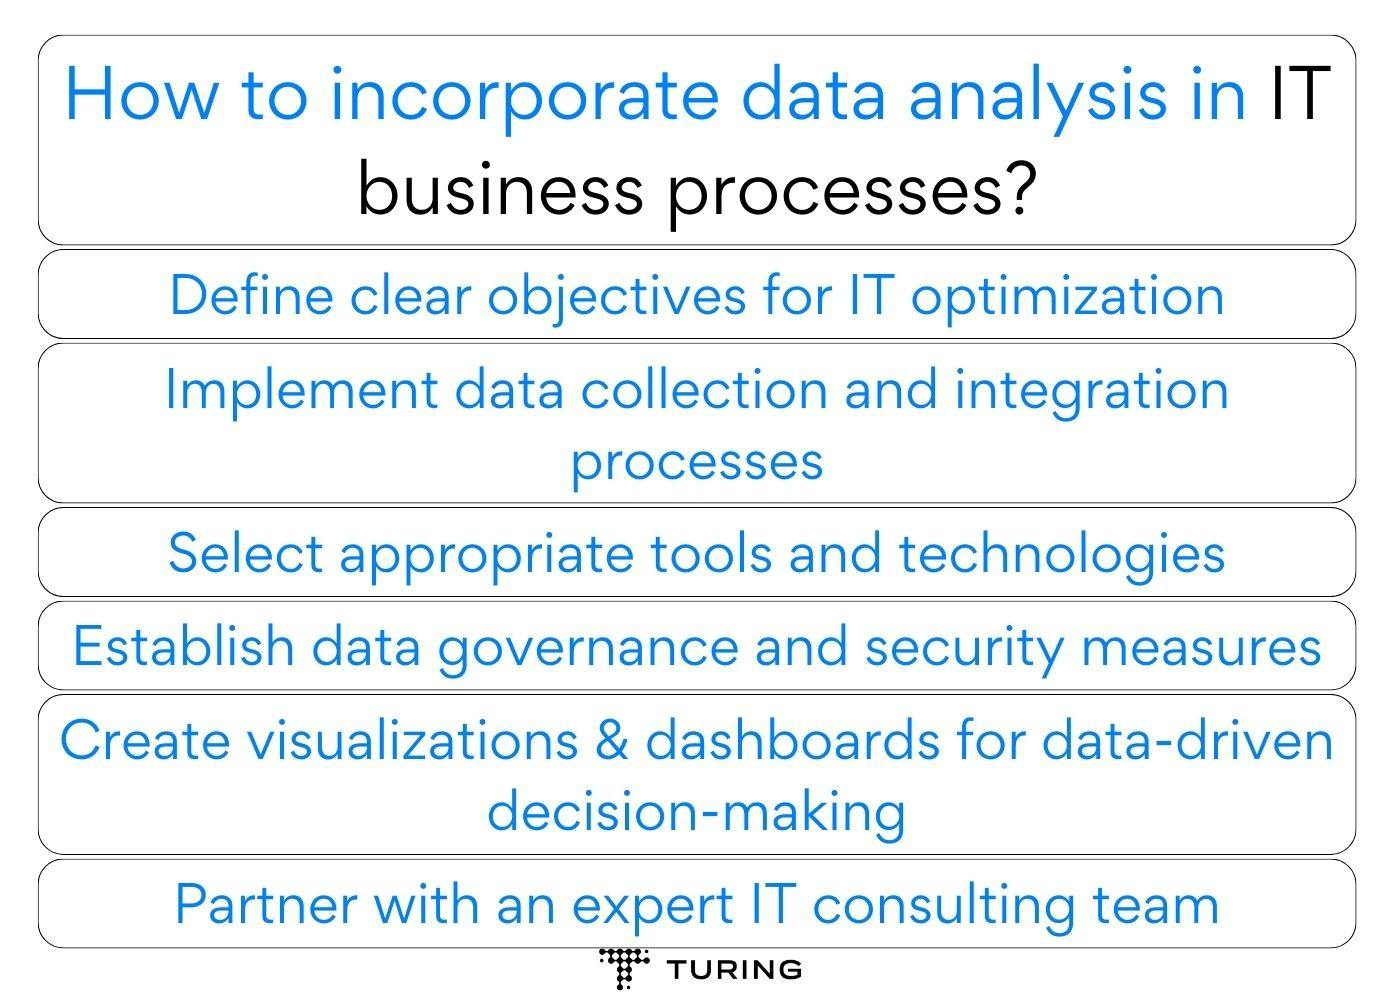 How to incorporate data analysis in IT business processes?